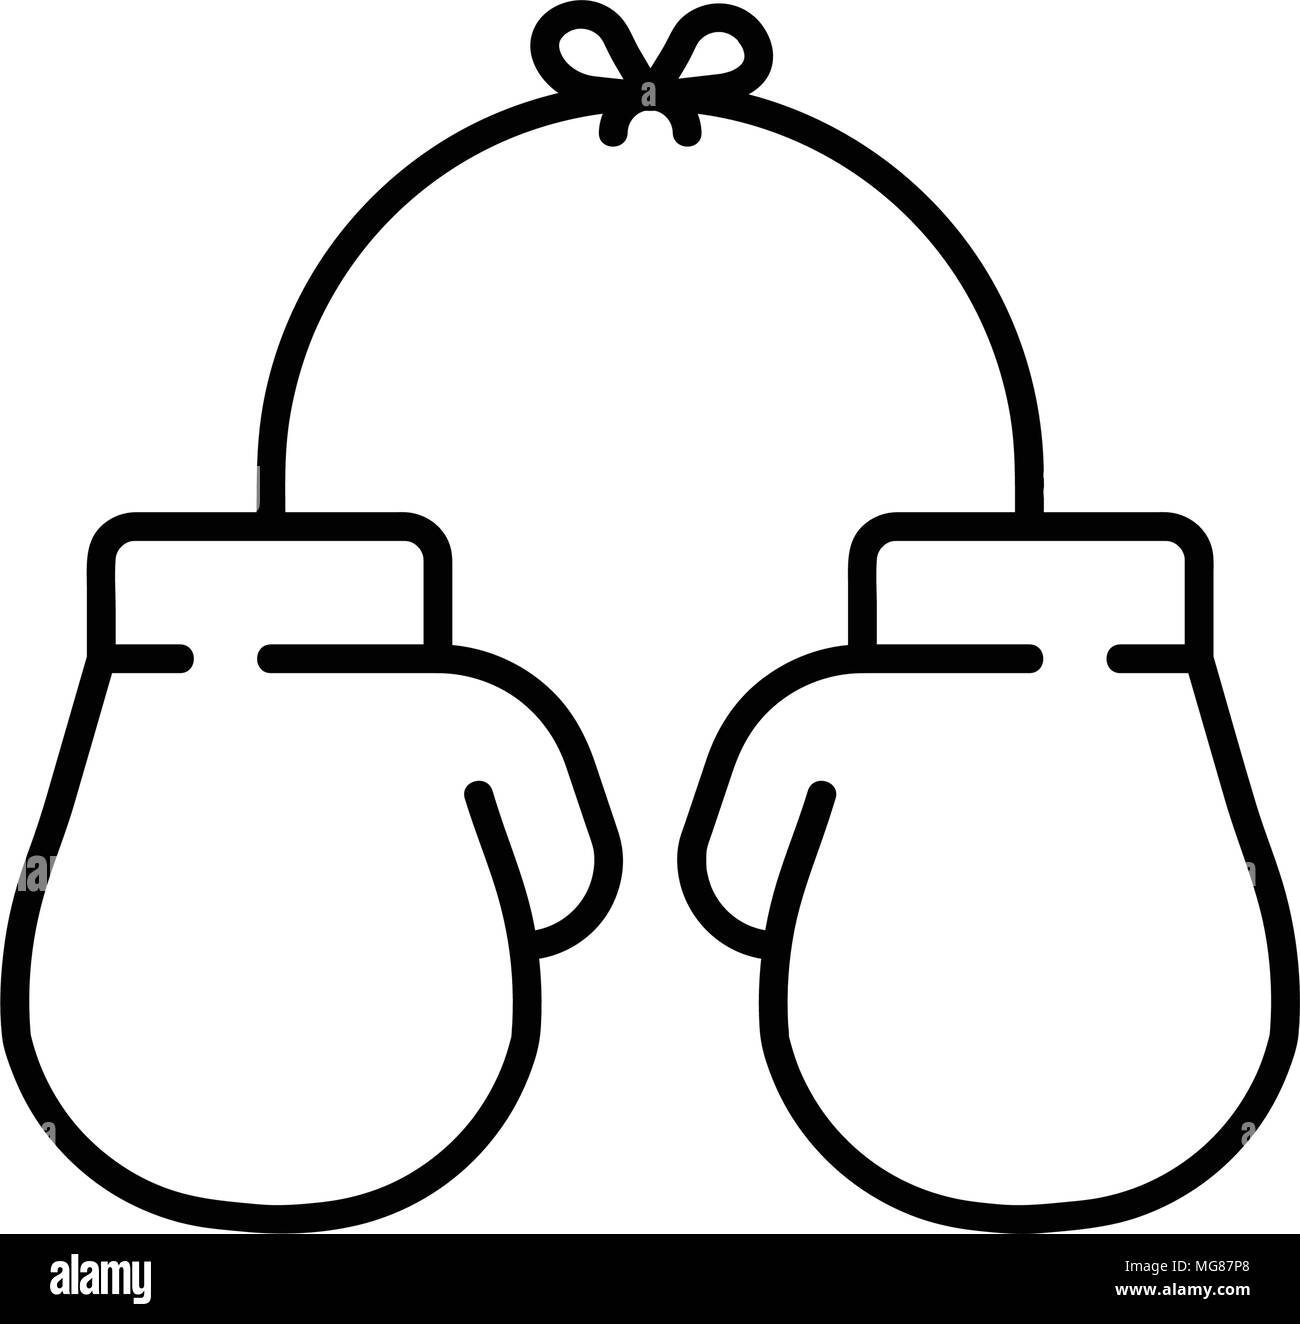 Boxing gloves icon, isolated on white background Stock Vector